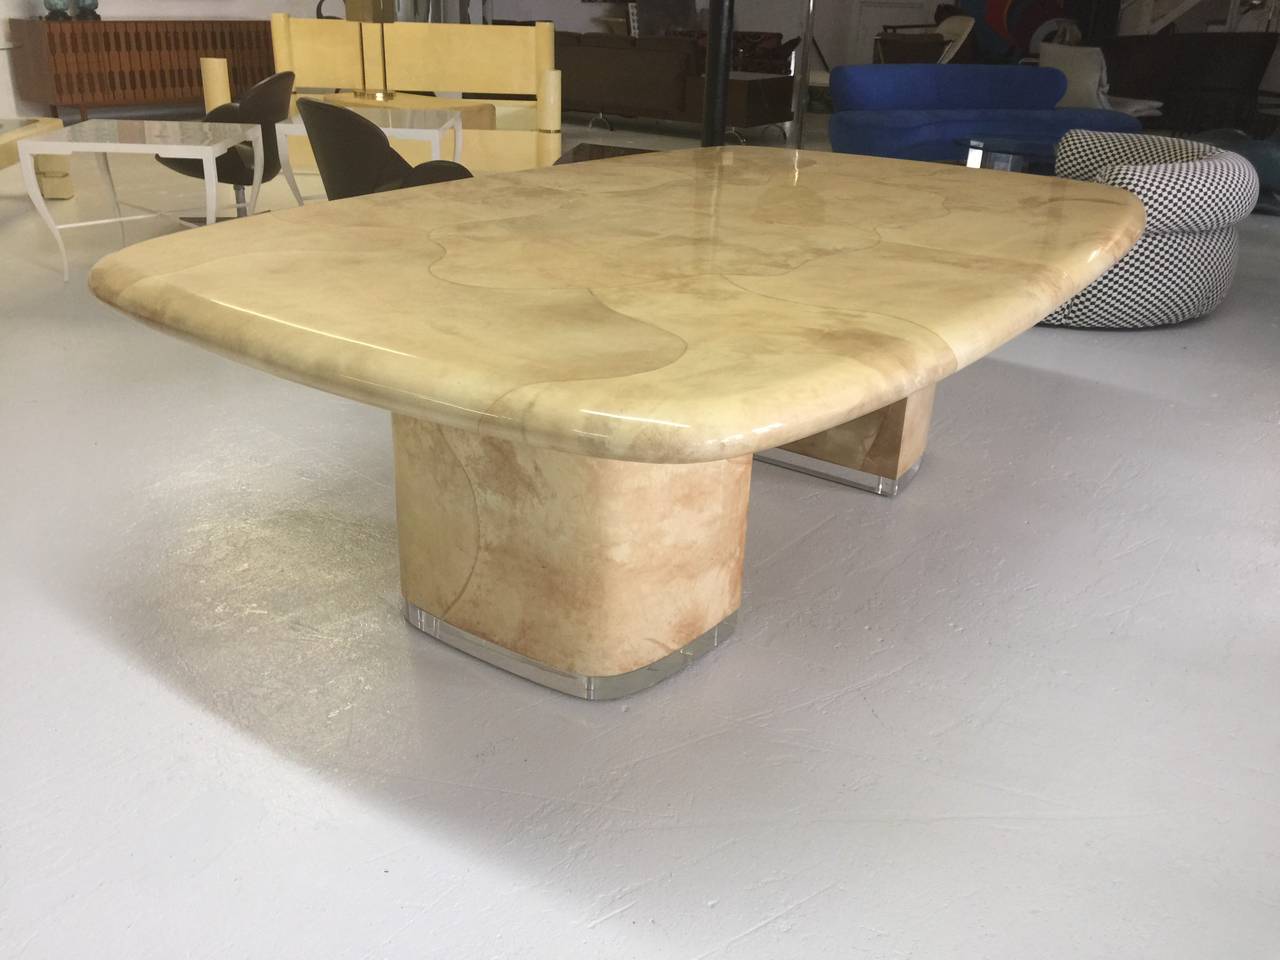 Massive goatskin dining room table by Steve Chase.
Featuring rounded rectangular top
with bullnose edge supported by 
two pedestals on 3" thick solid Lucite base.
Two 20" matching extension boards.
